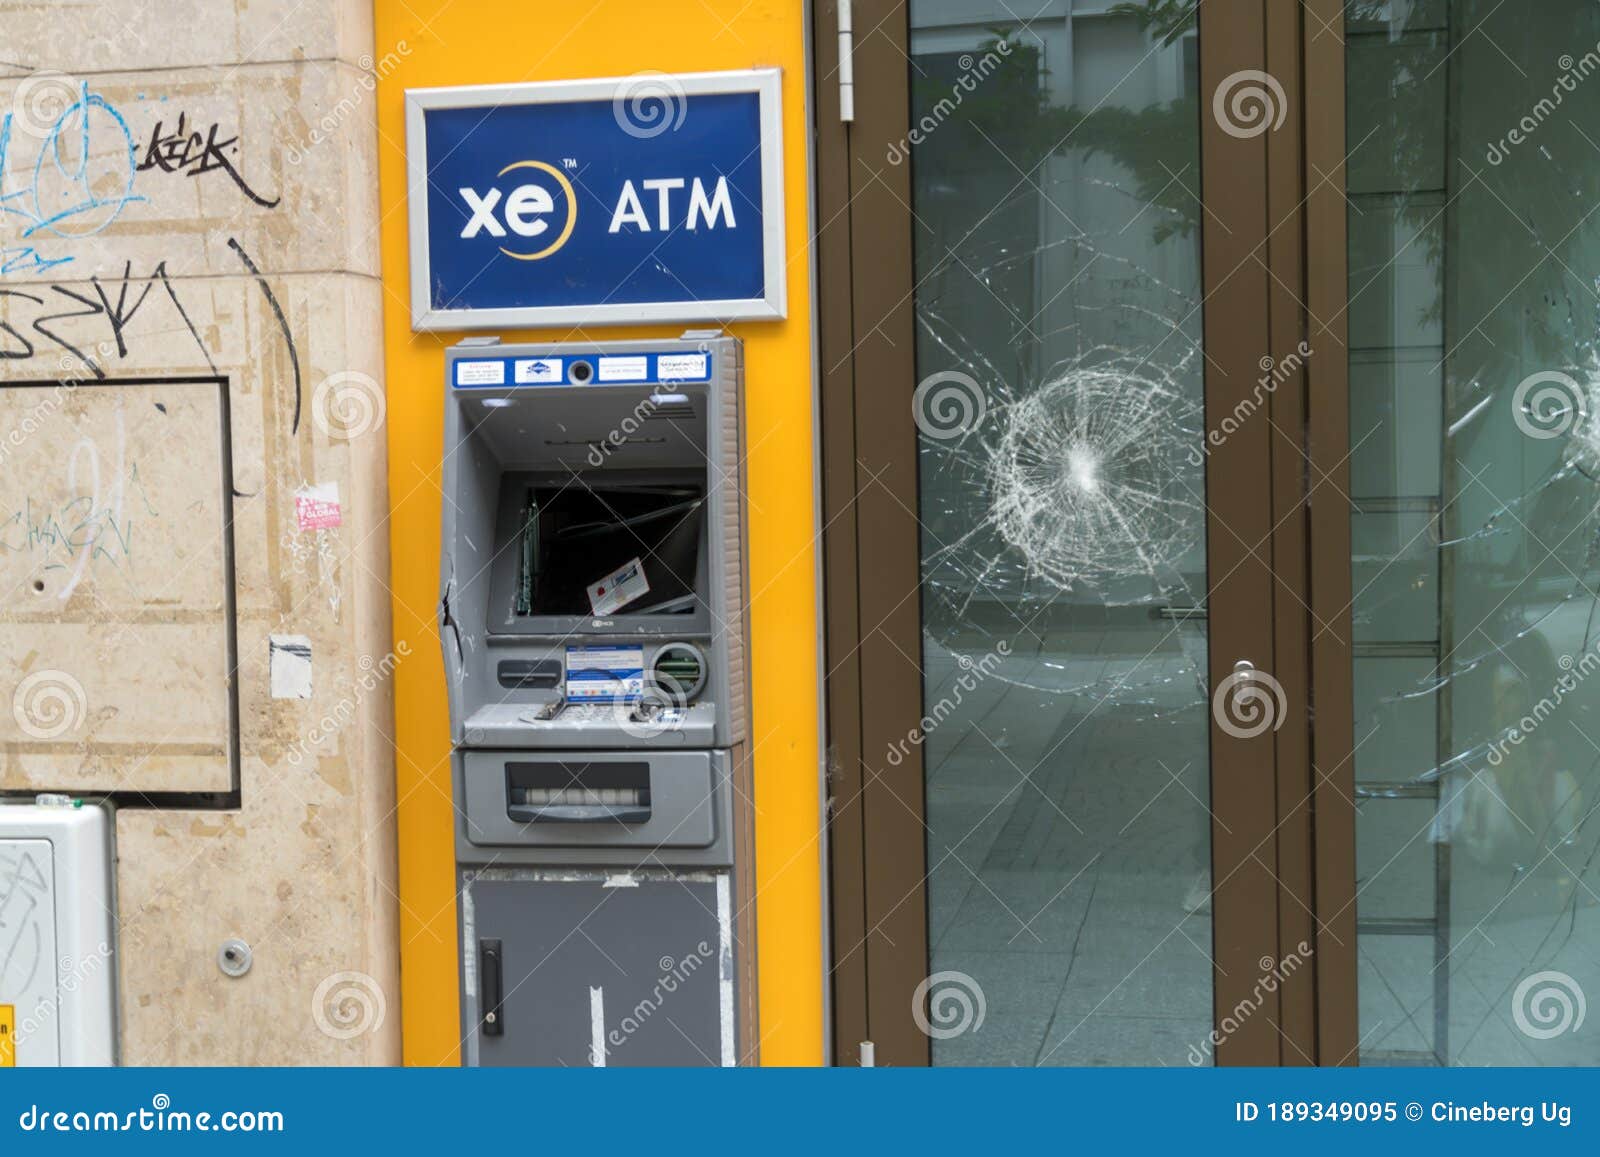 Broken ATM machine editorial image. Image of automatic 189349095